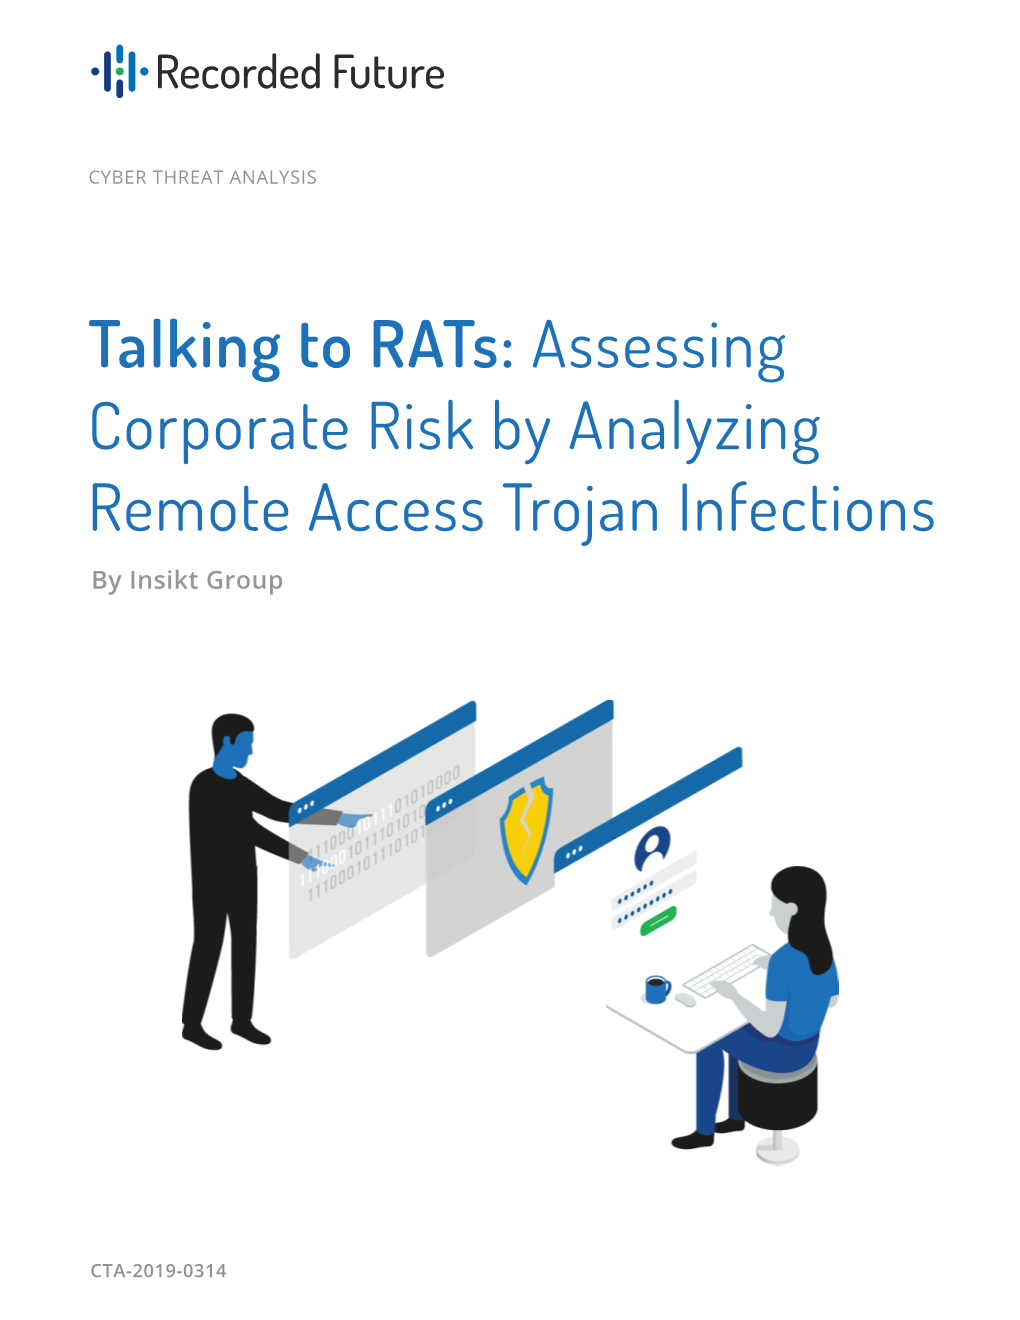 Talking to Rats: Assessing Corporate Risk by Analyzing Remote Access Trojan Infections by Insikt Group